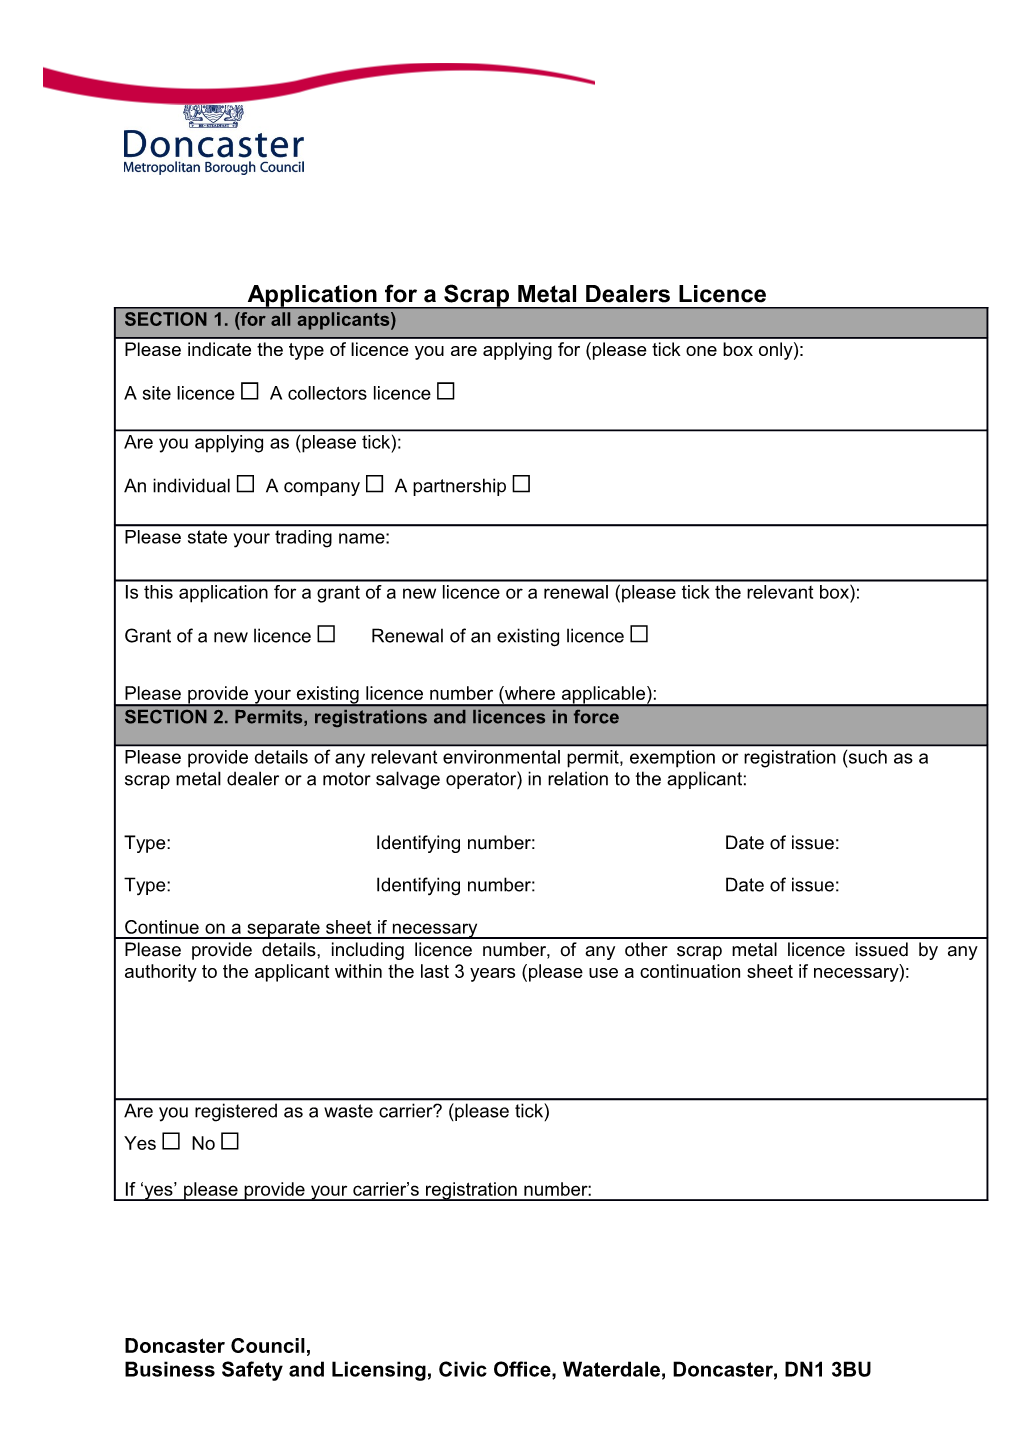 Application for a Scrap Metal Dealers Licence